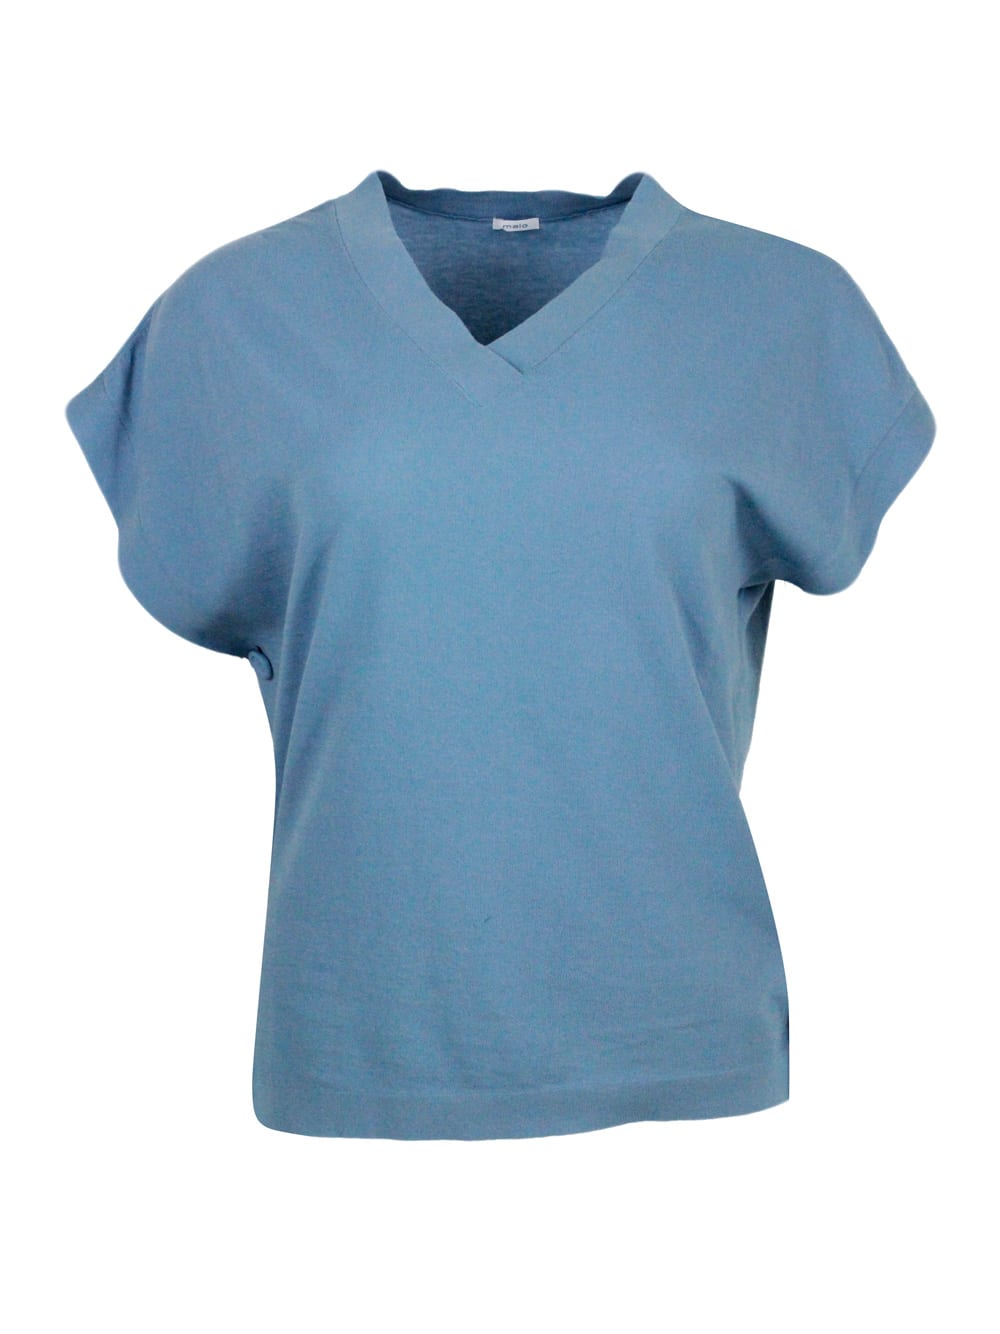 Malo Cotton Sweater With Sleeveless V-neck And Buttons On The Sides In Light Blu